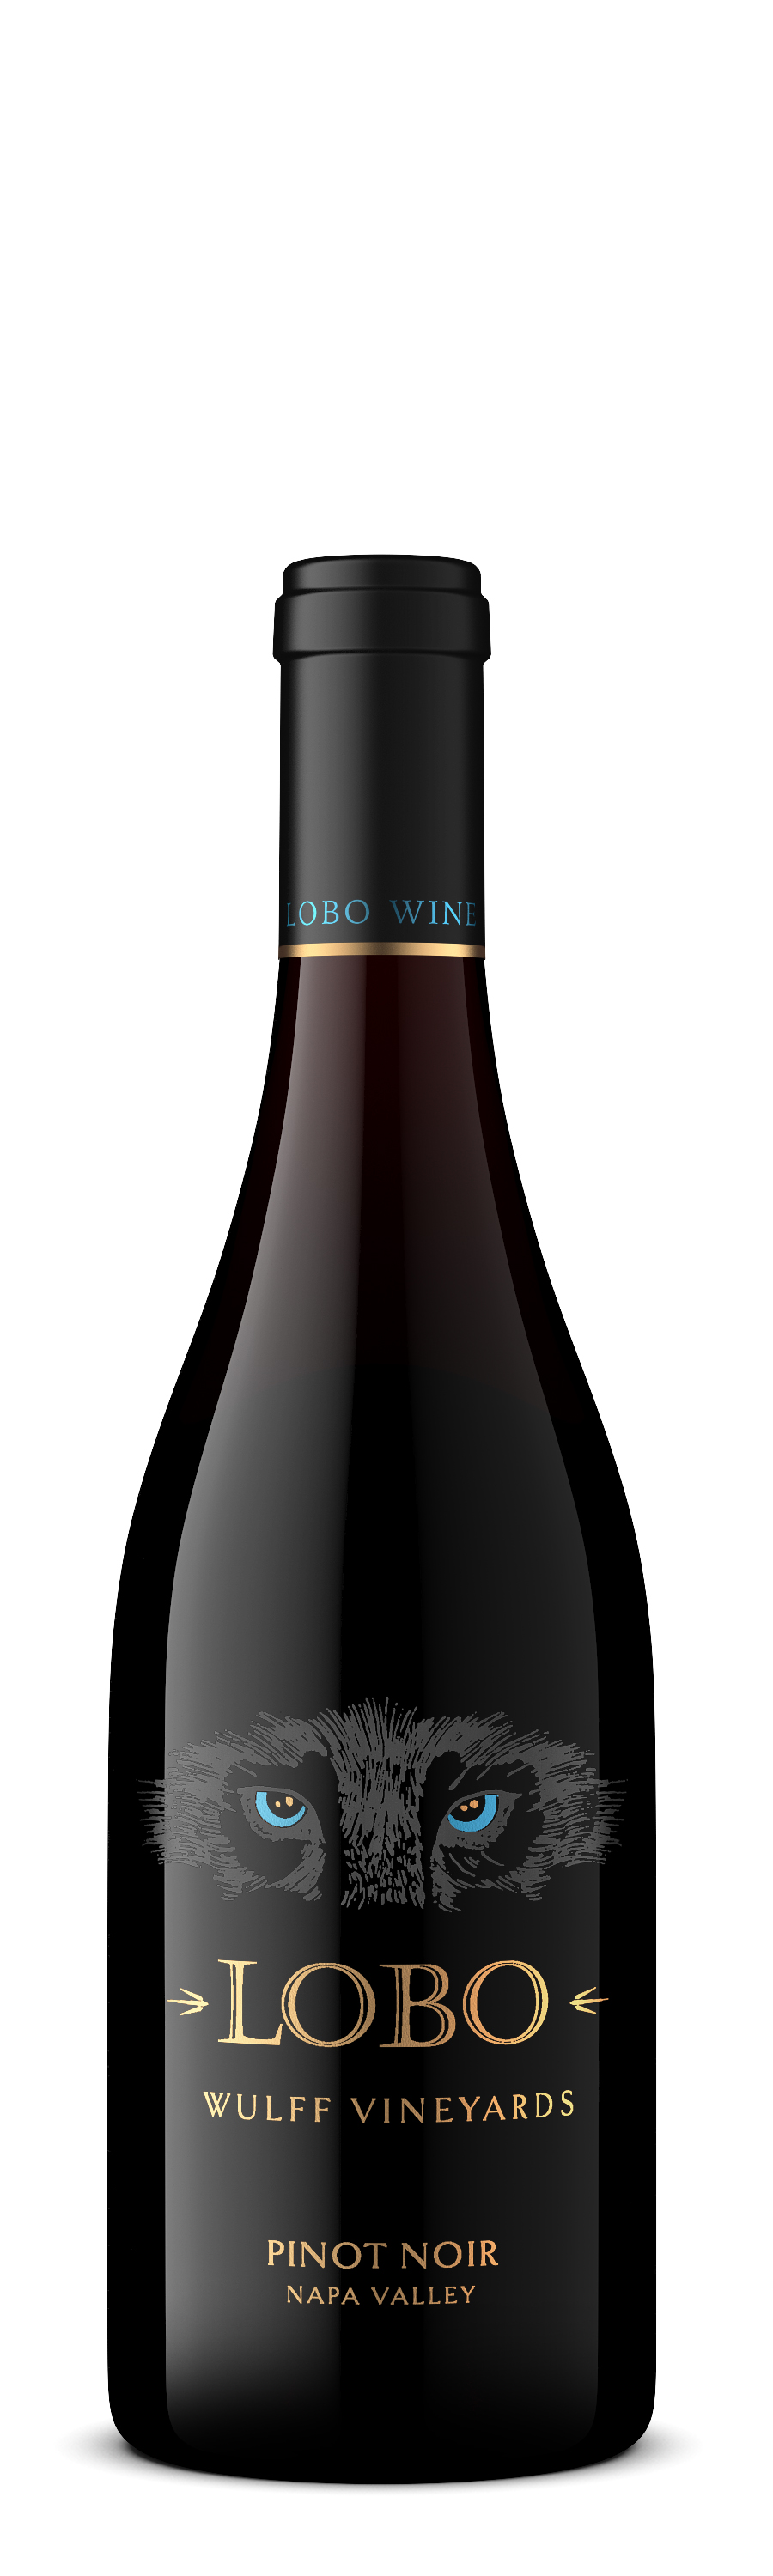 Product Image for 2013 Napa Valley Pinot Noir